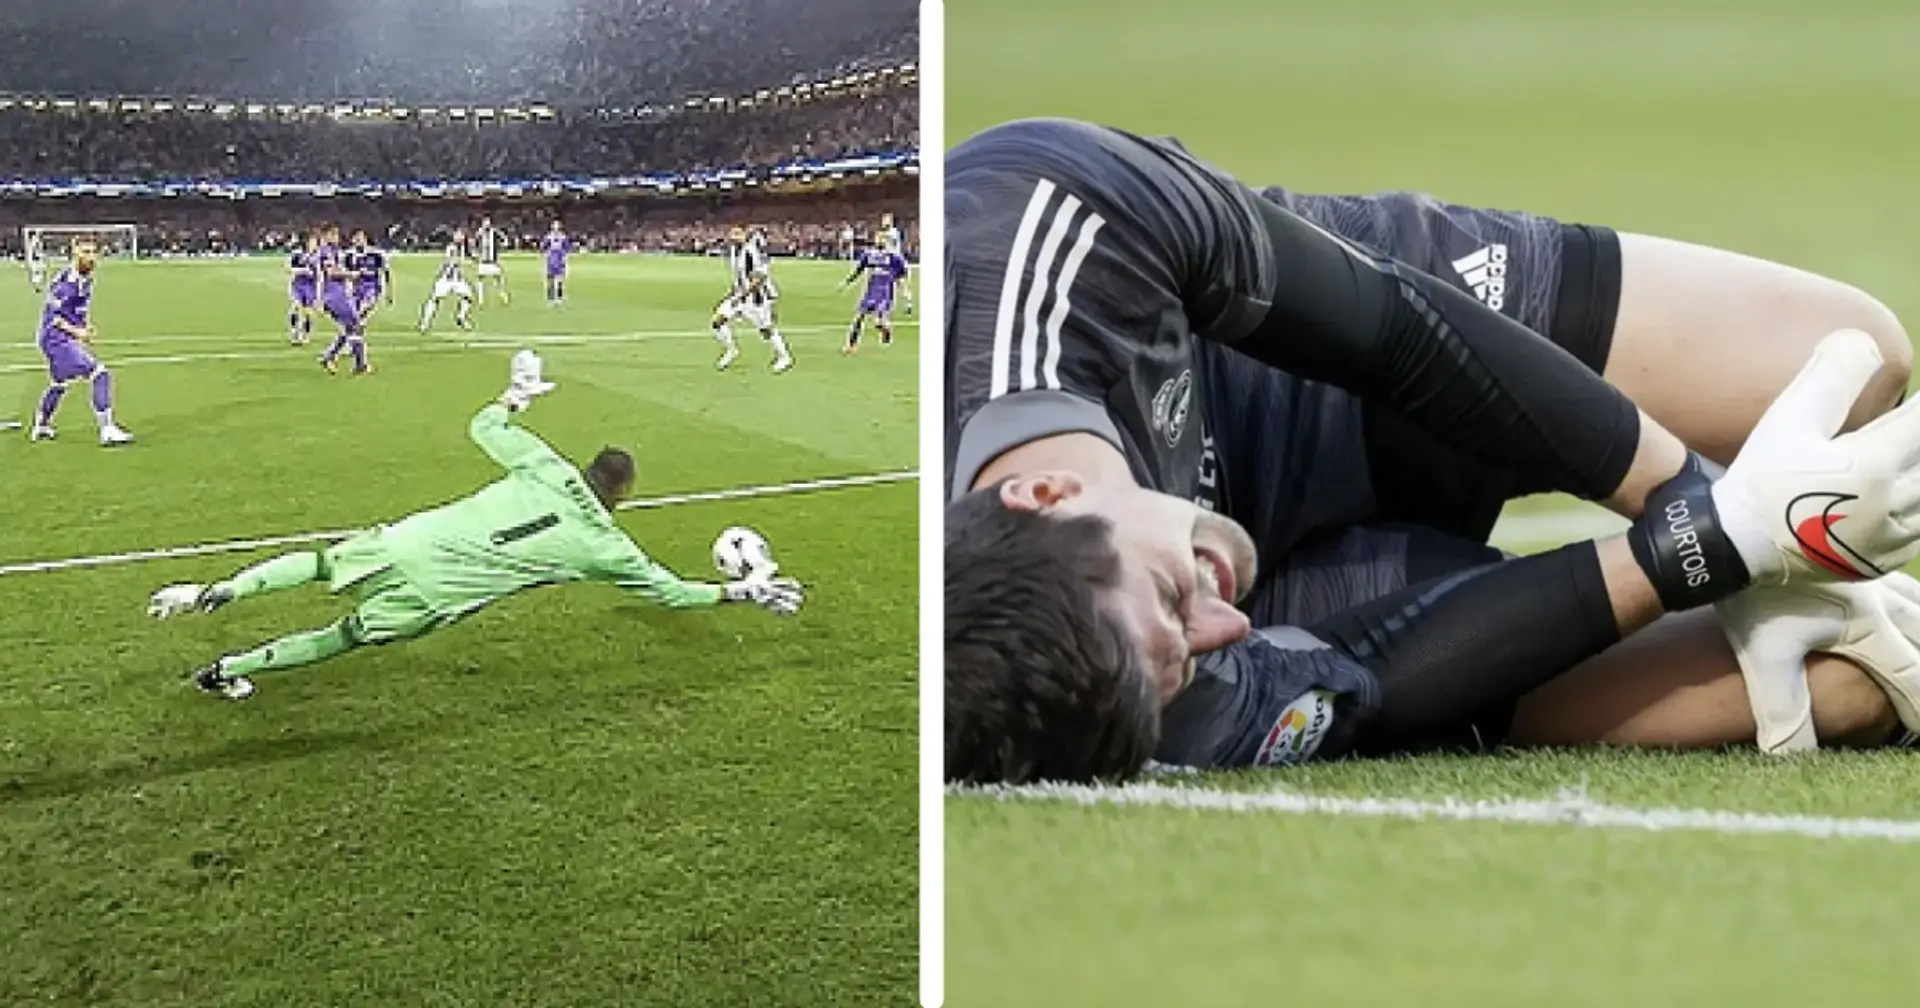 Ex-Real Madrid star offered himself to club after Courtois injury (reliability: 5 stars)